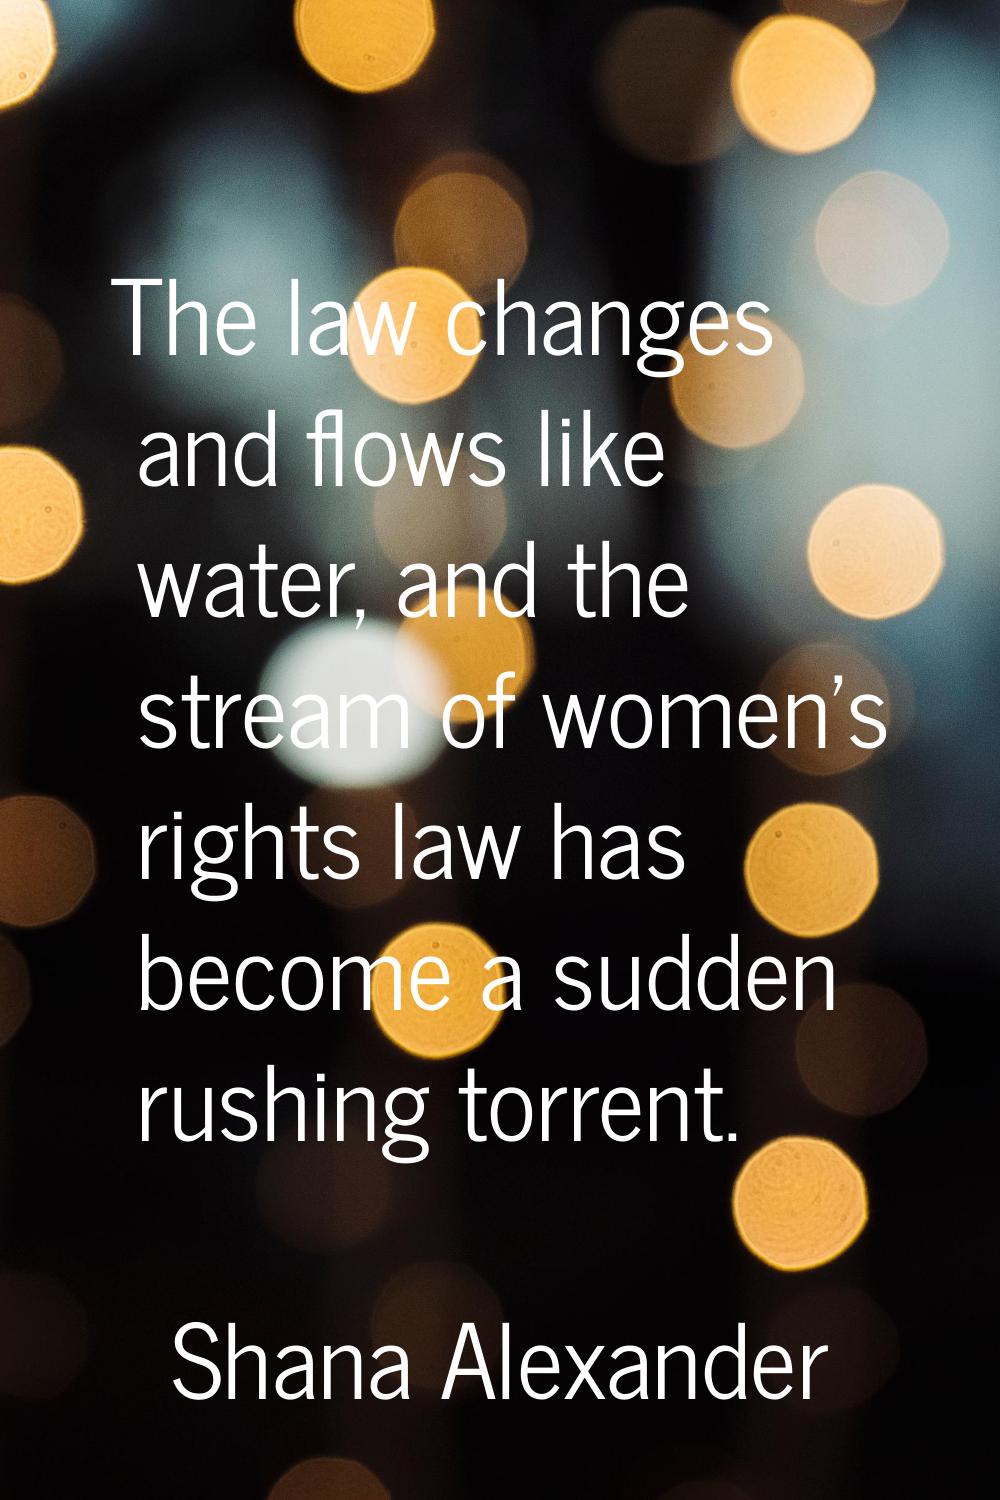 The law changes and flows like water, and the stream of women's rights law has become a sudden rush